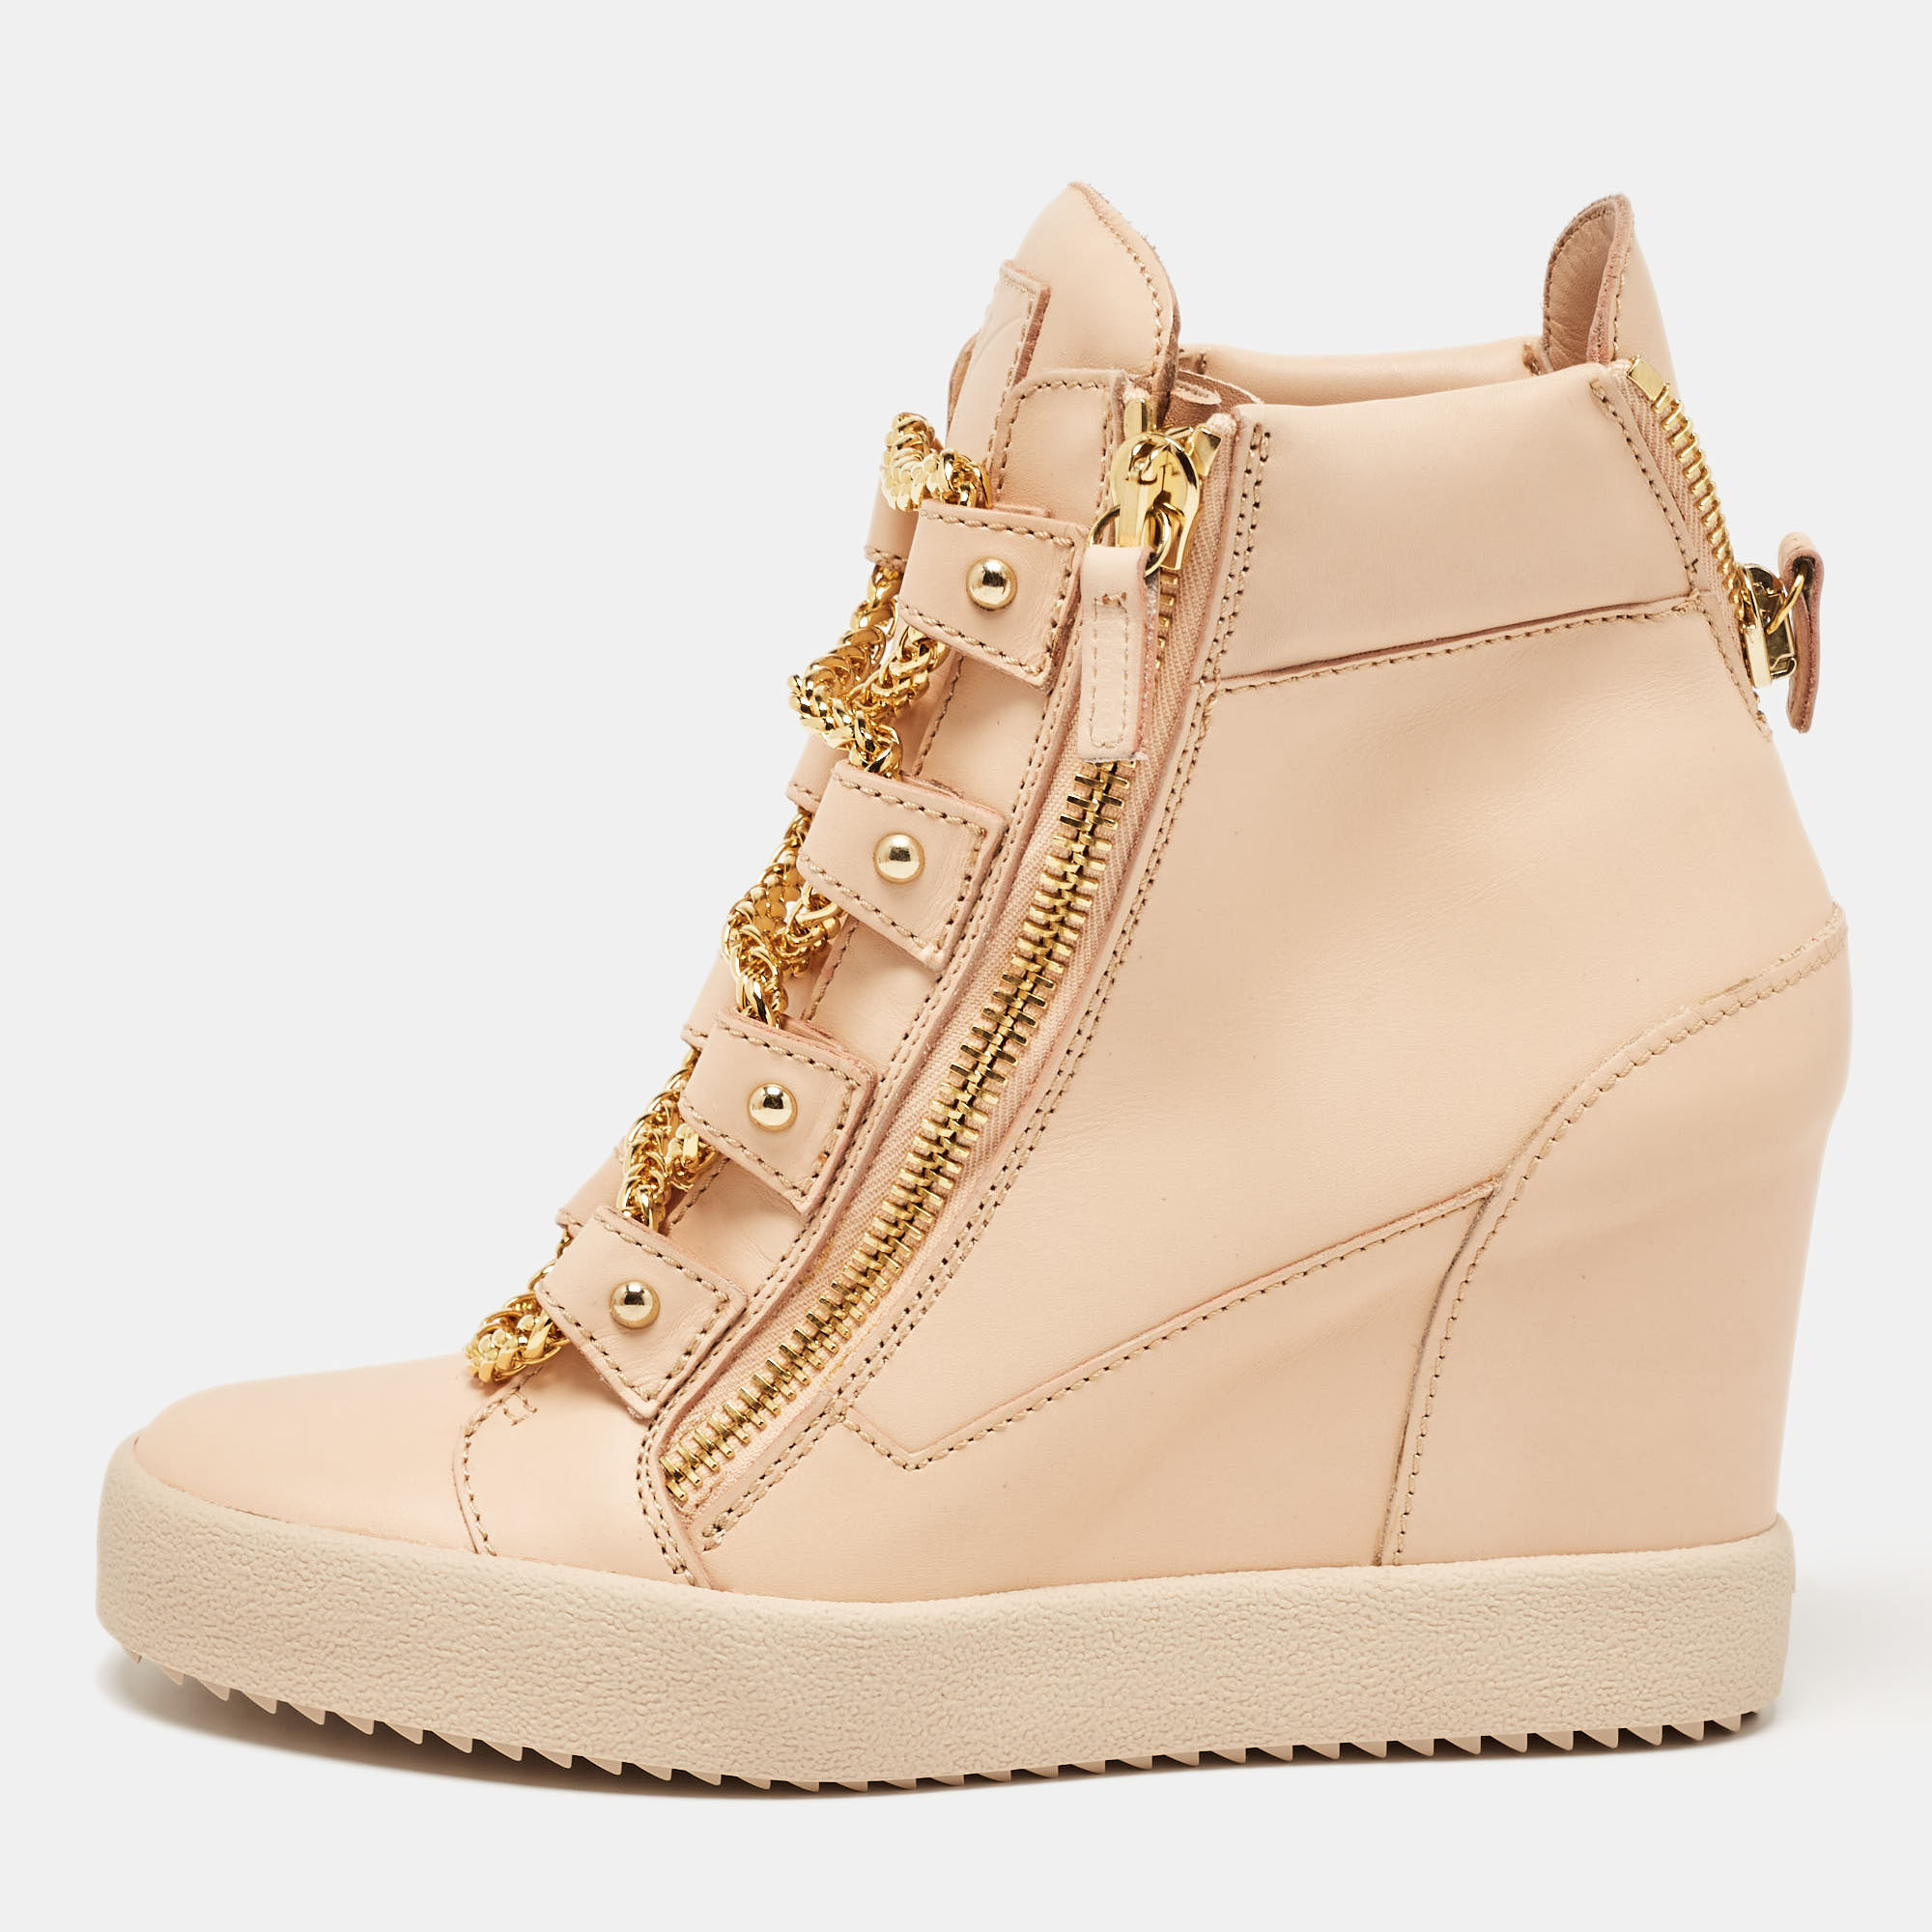 

Giuseppe Zanotti Beige Leather Chain Detail High Top Wedge Sneakers Size